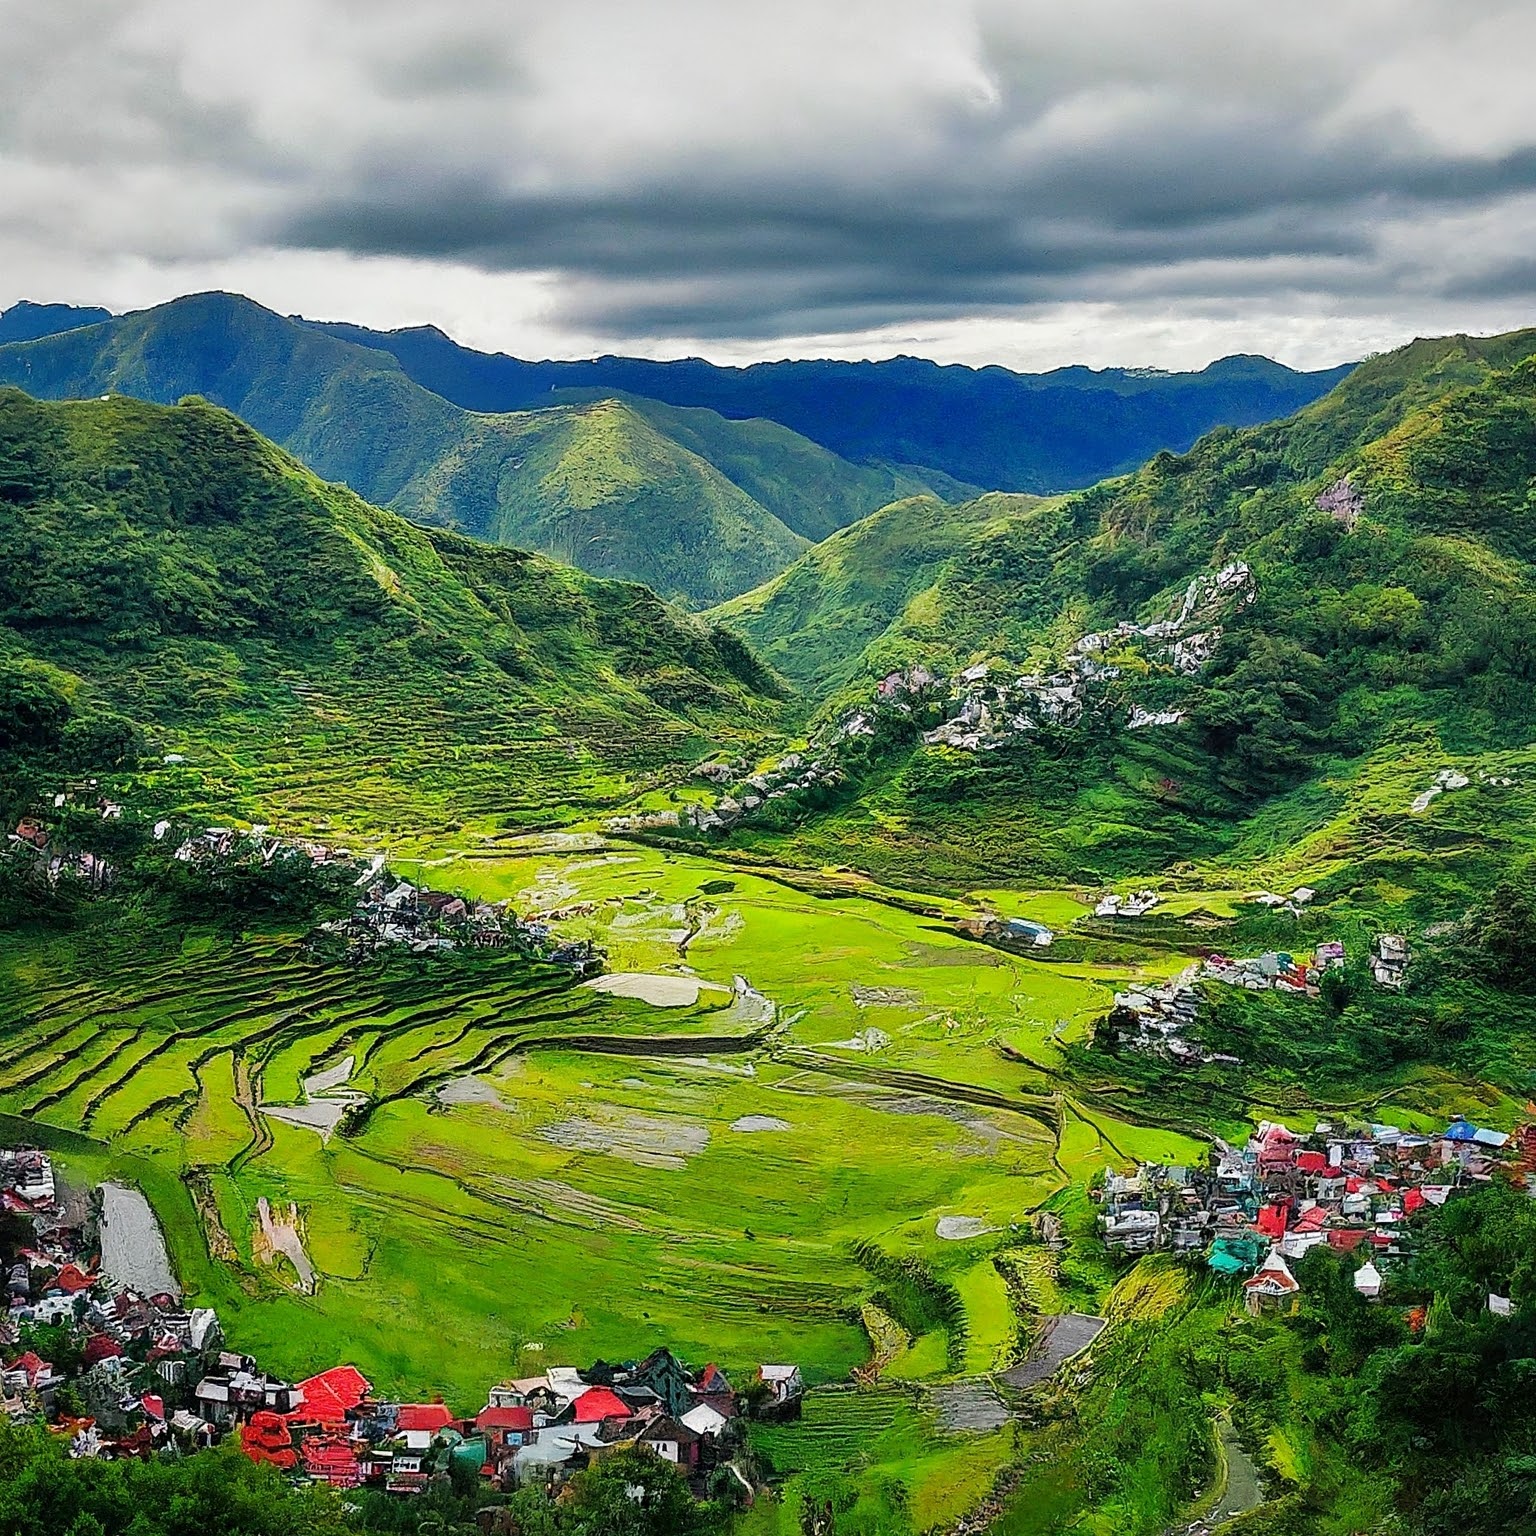 Panoramic view of Banaue rice terraces in Mountain Province, Philippines.